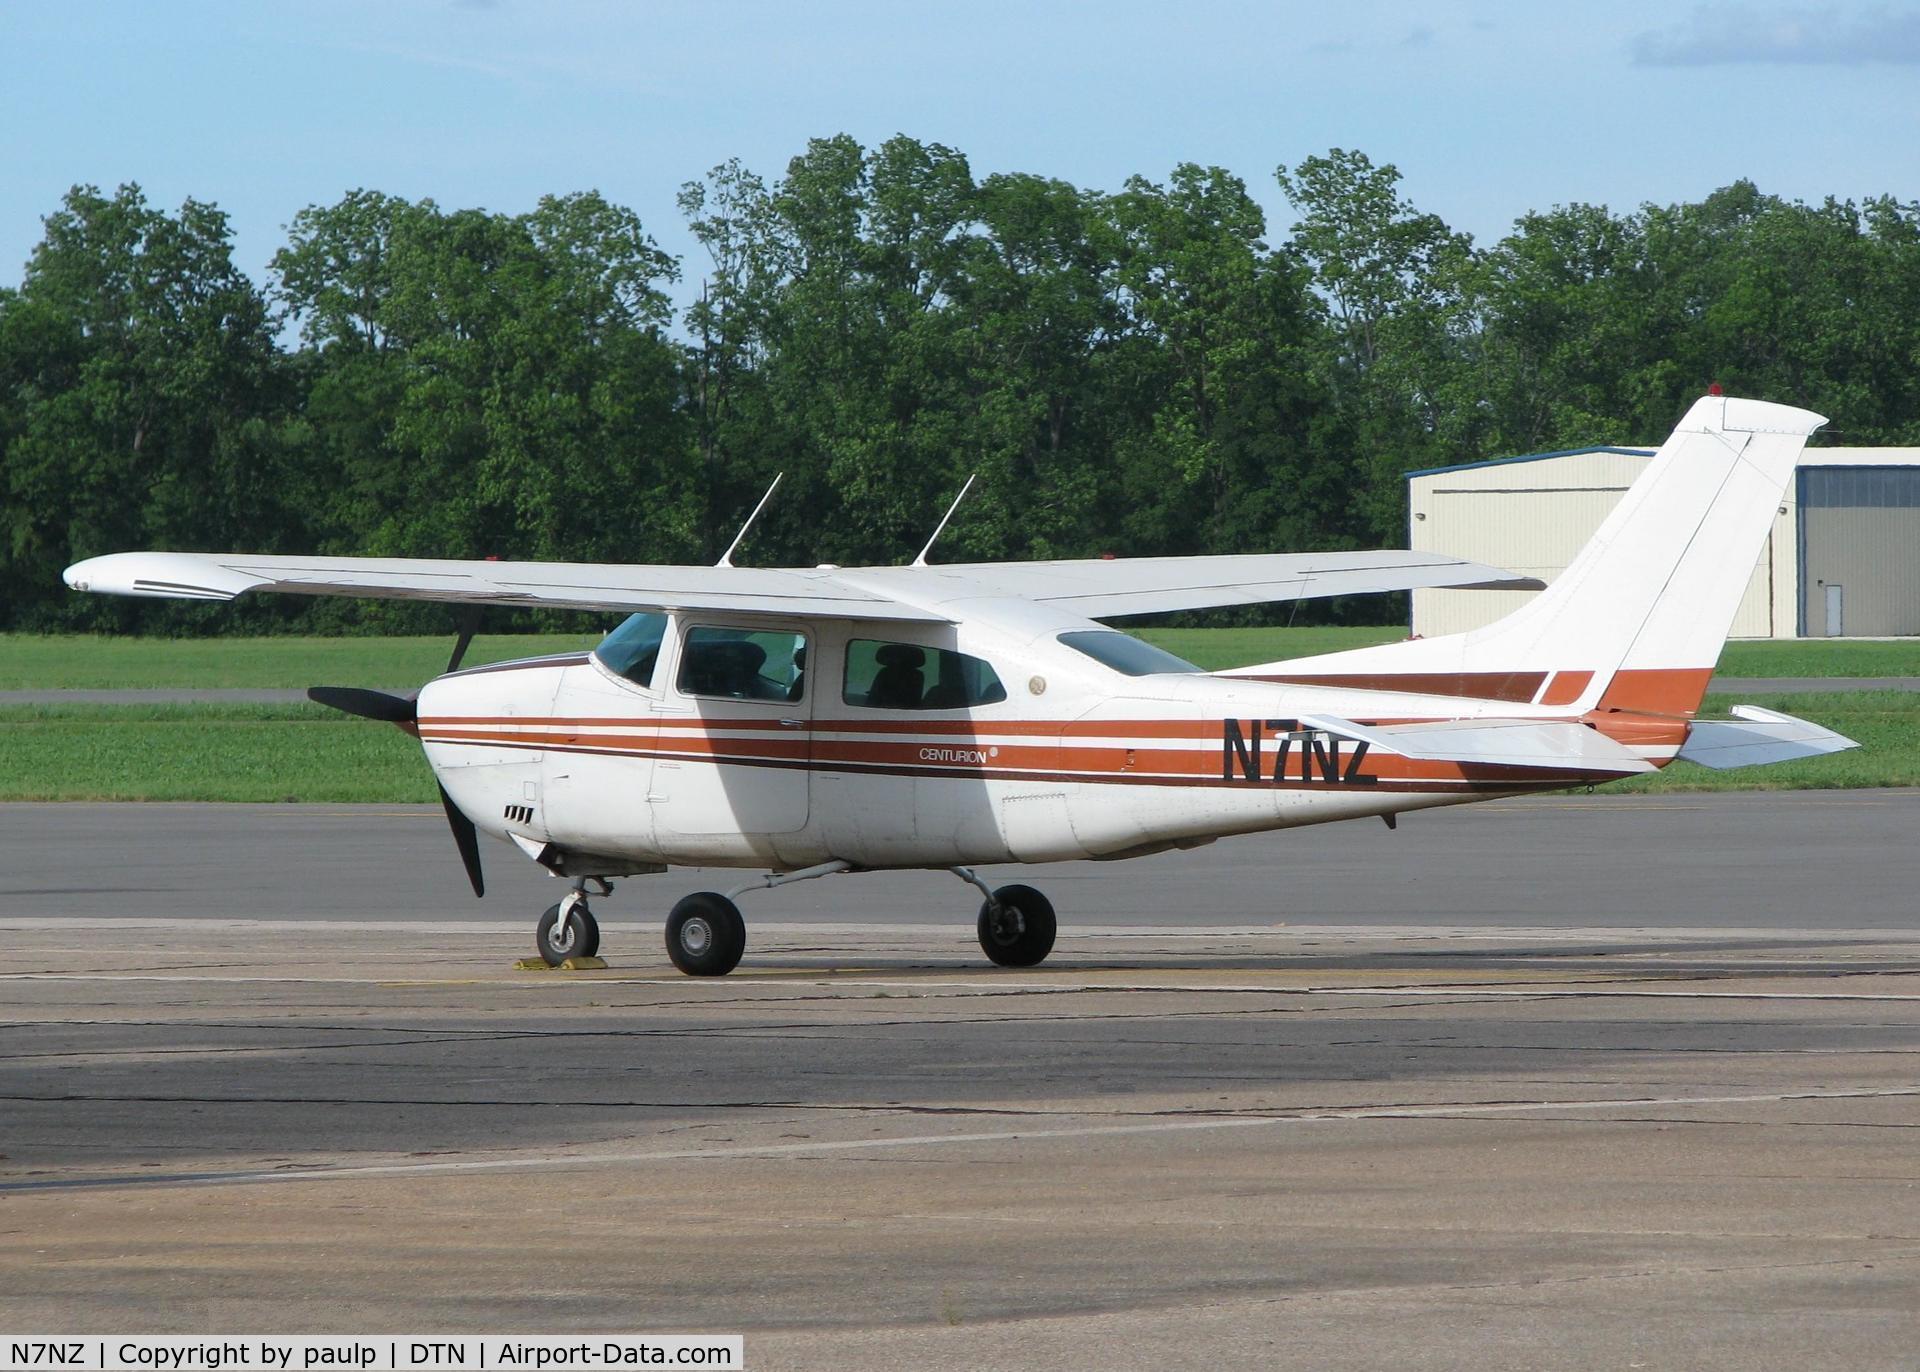 N7NZ, 1978 Cessna 210M Centurion C/N 21062854, At the Shreveport Downtown airport.